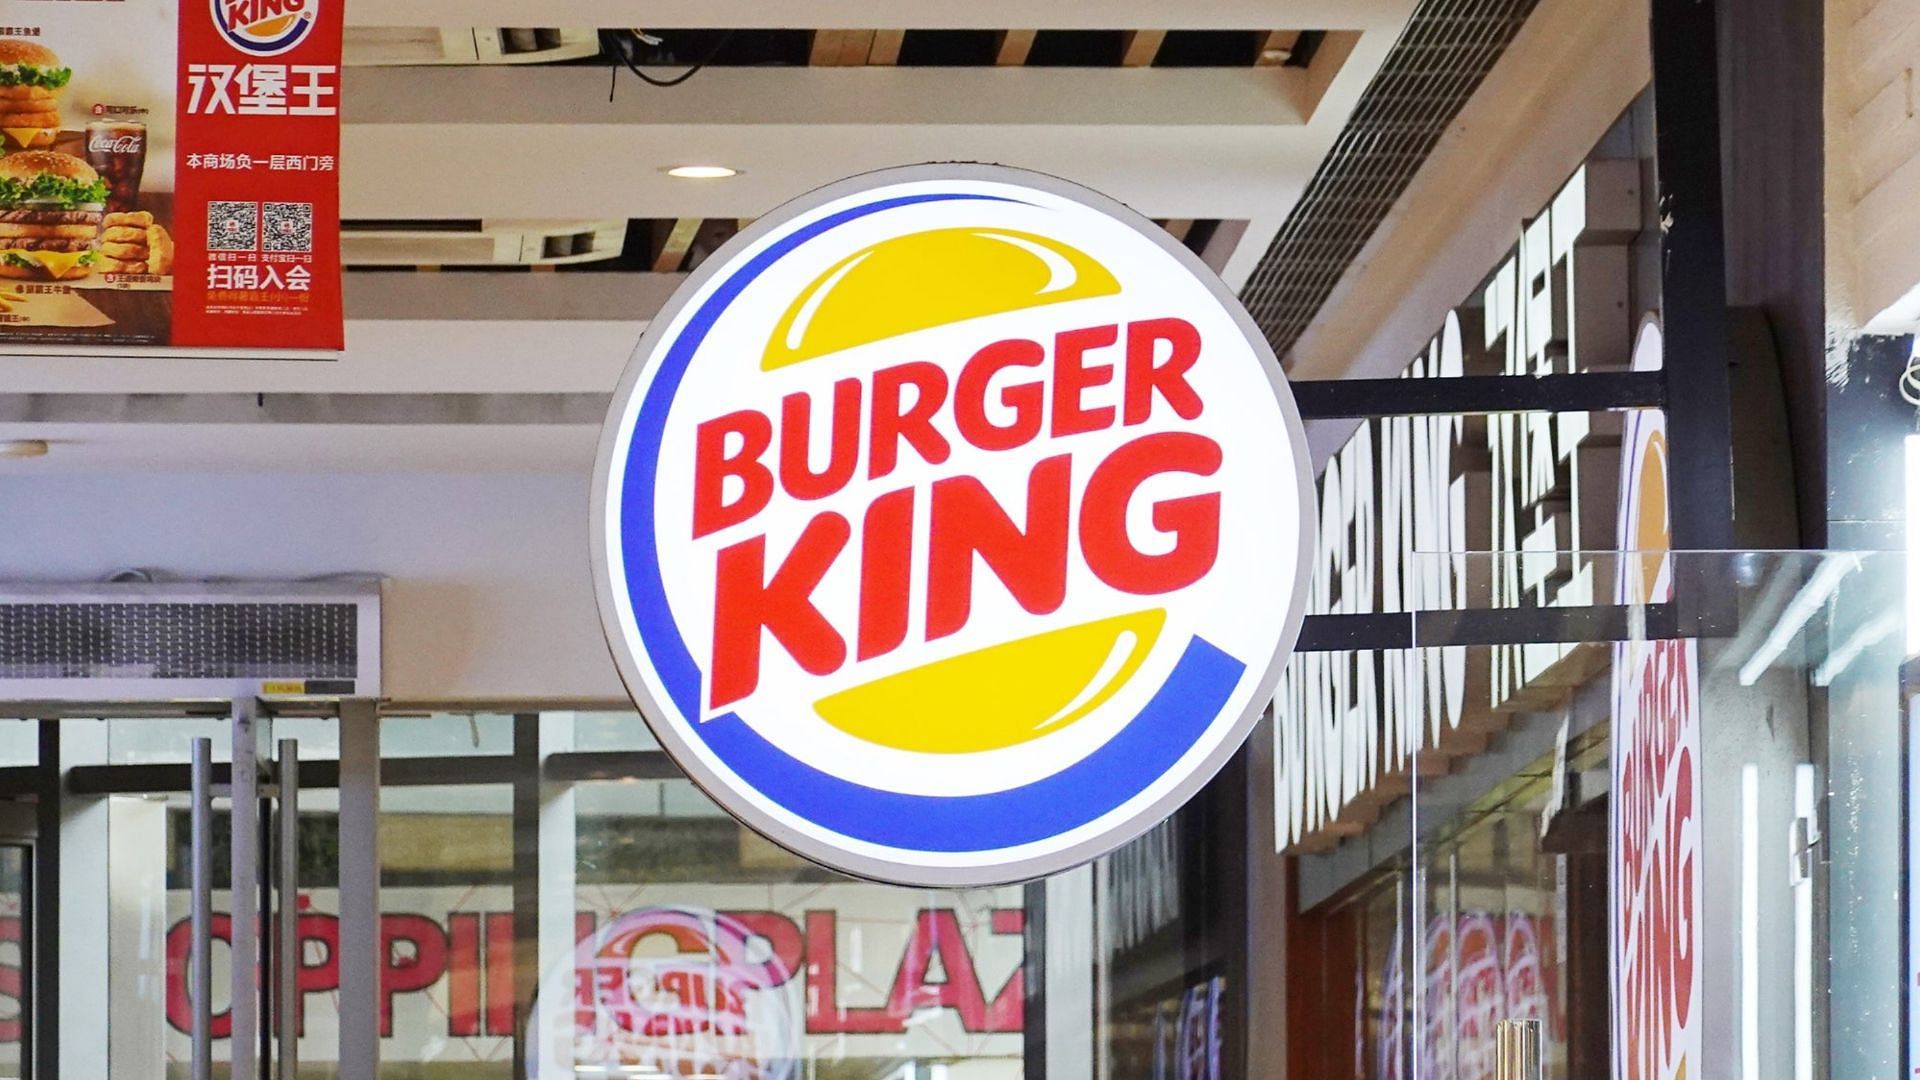 Over 26 Burger King restaurants in the Michigan area to be shuttered down following unforeseen circumstances (Image via SOPA Images/Getty Images)